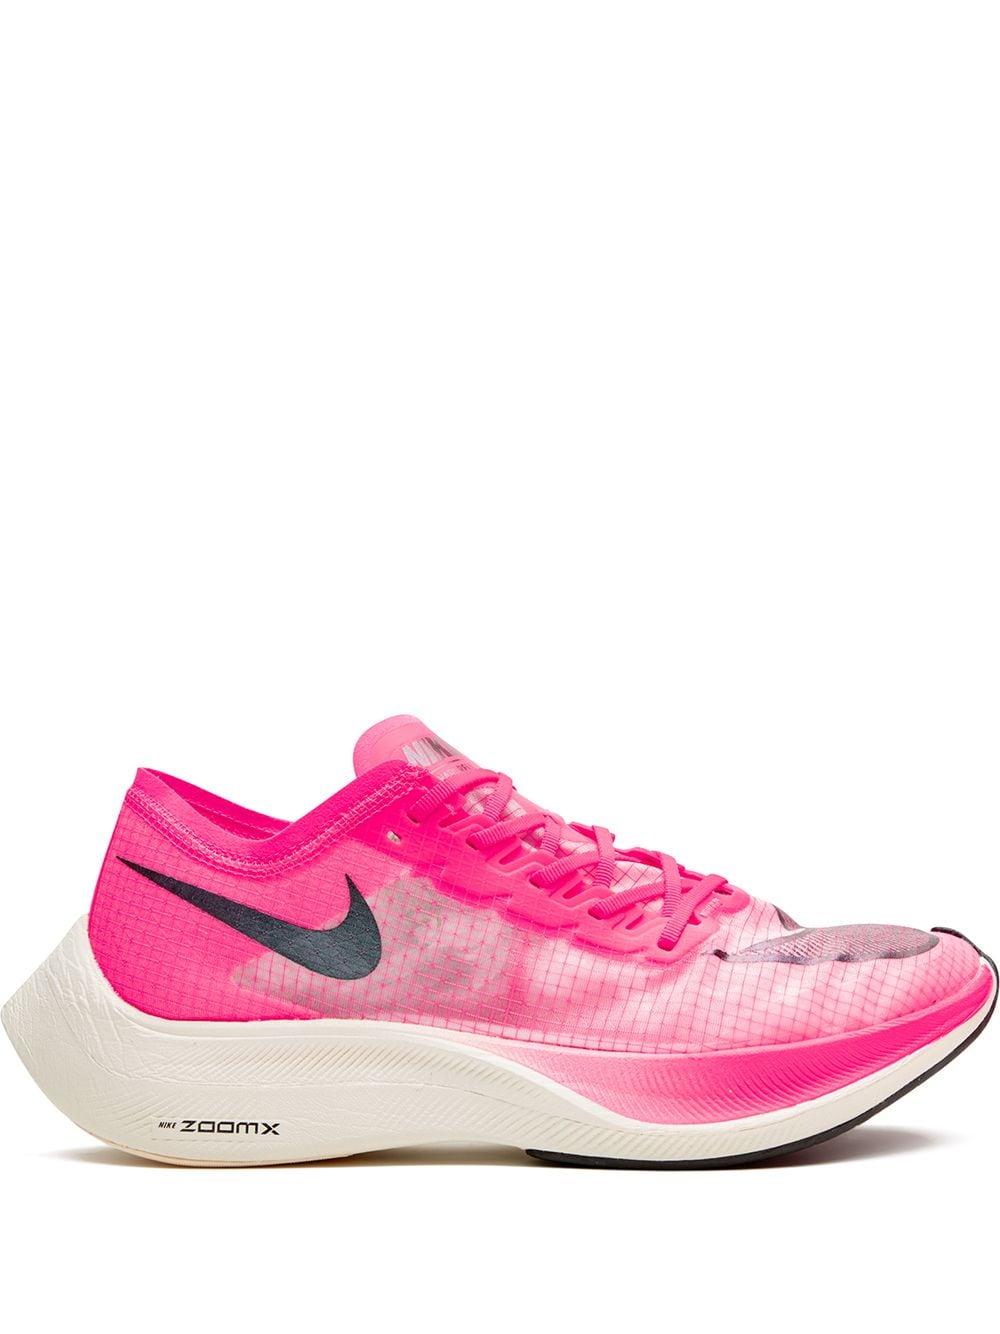 Nike Zoomx Vaporfly Next% Running Shoe in Black/Pink (Pink) for 